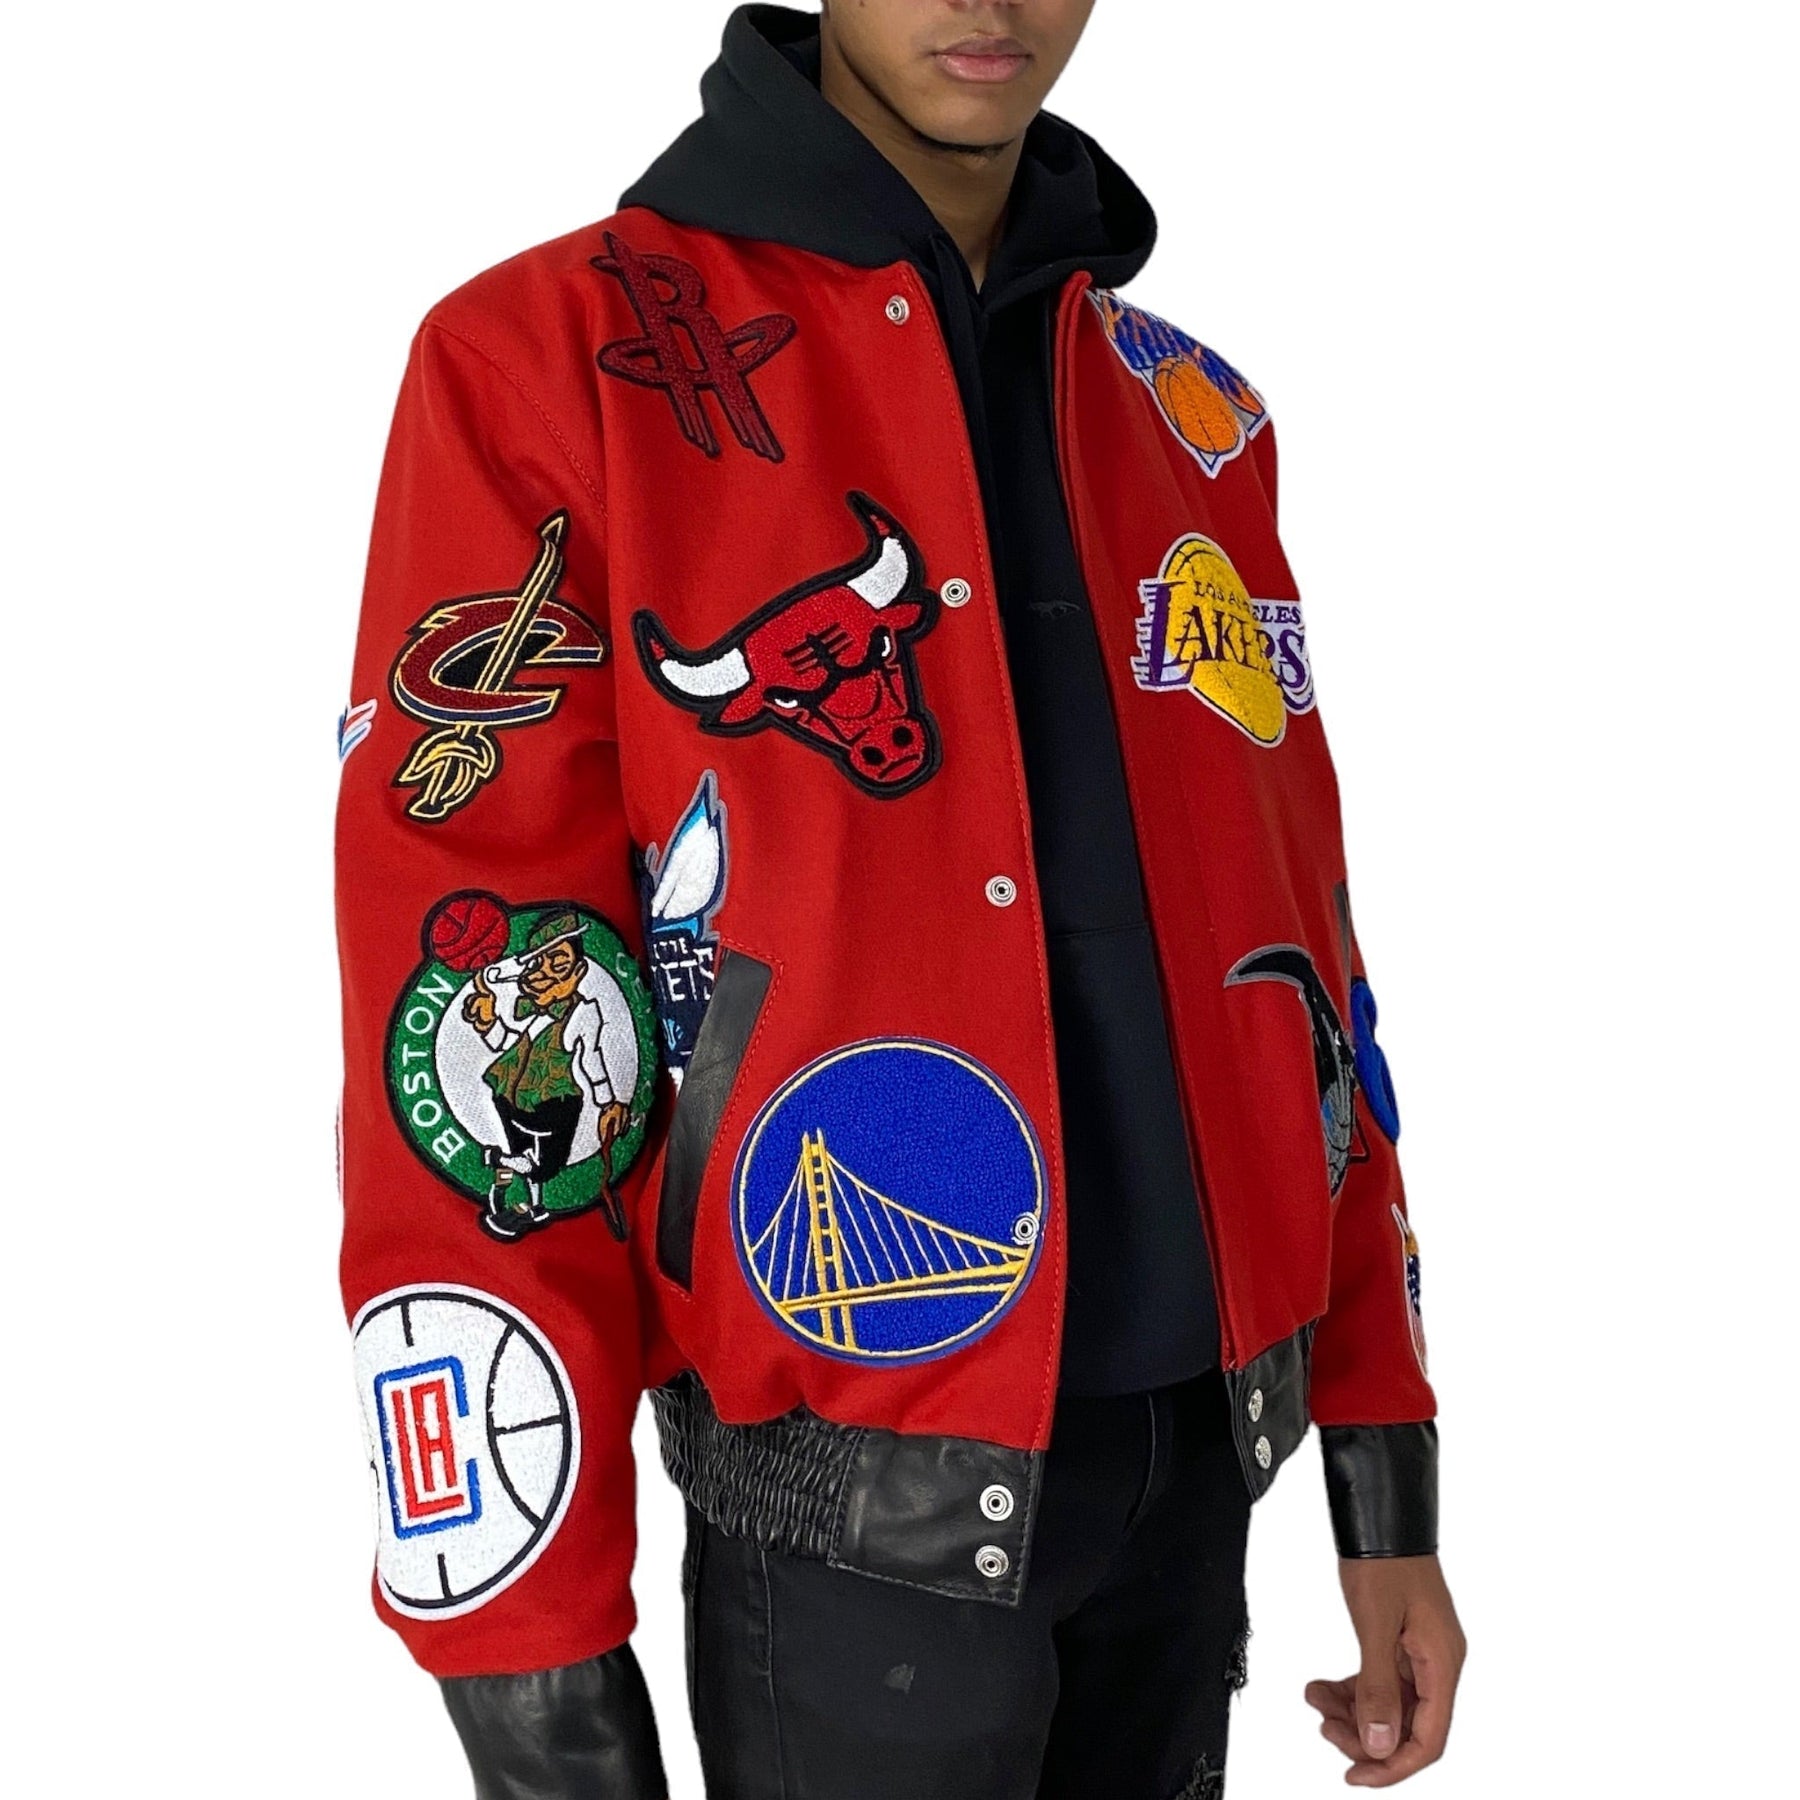 NBA COLLAGE WOOL & LEATHER JACKET Red